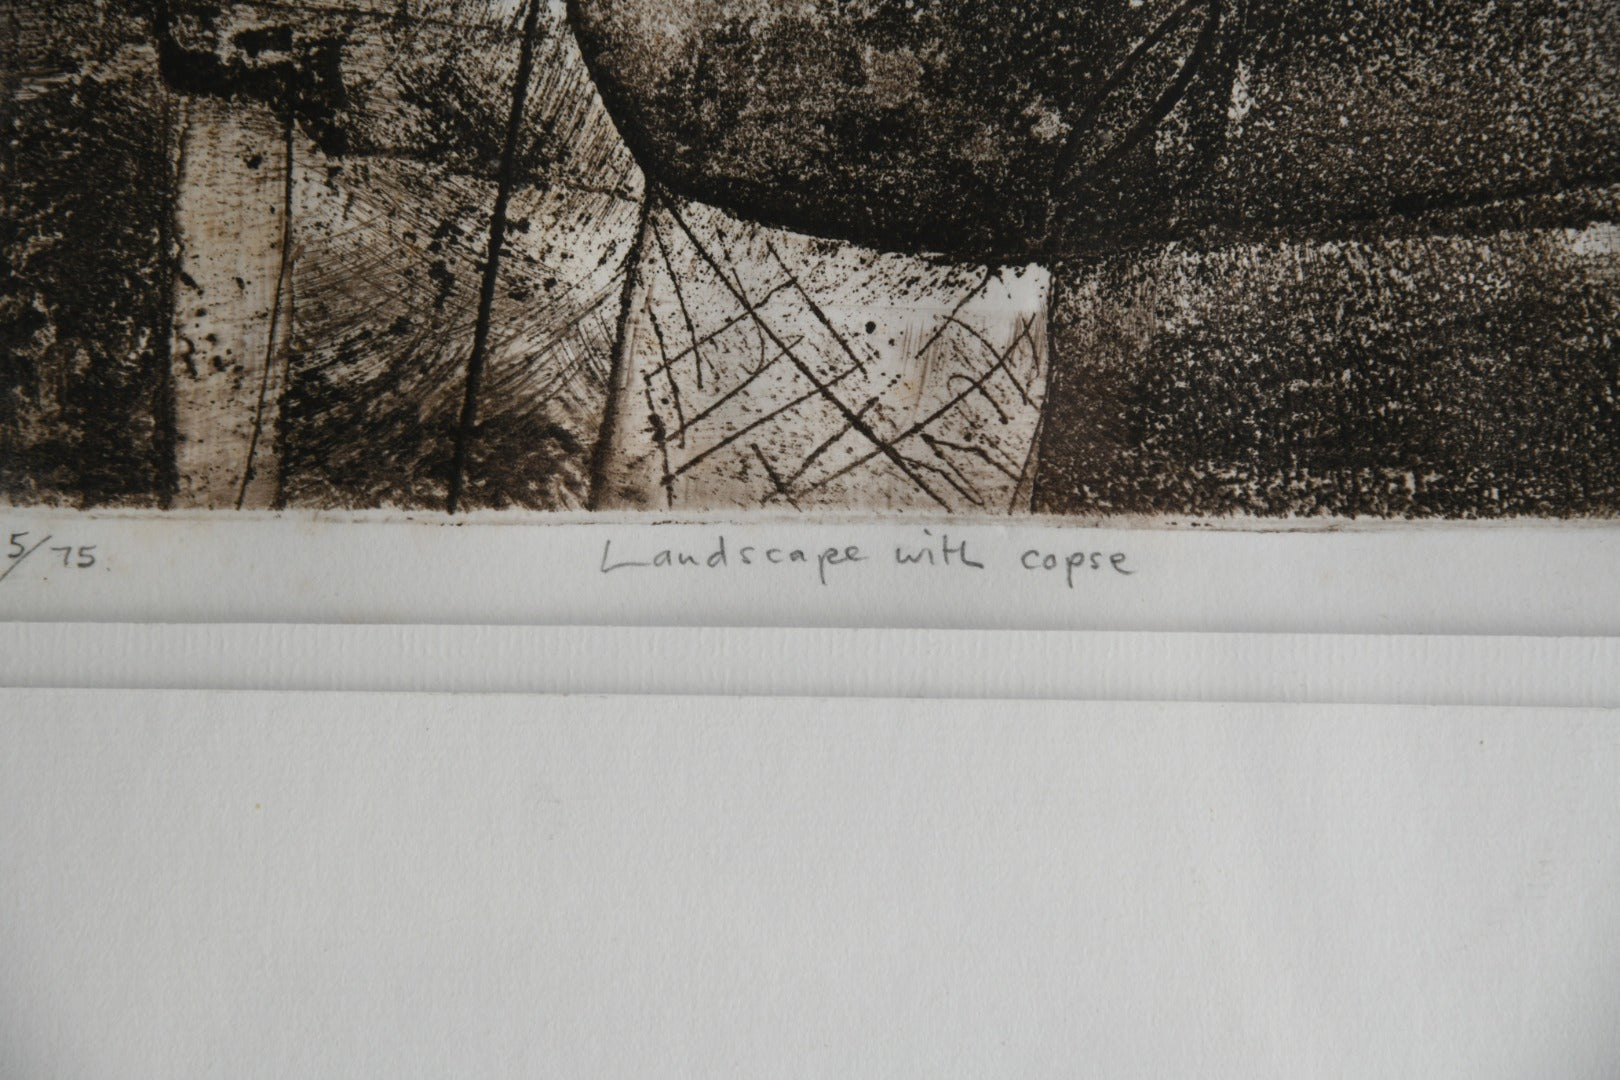 Peter Fox - Landscape with Copse Etching